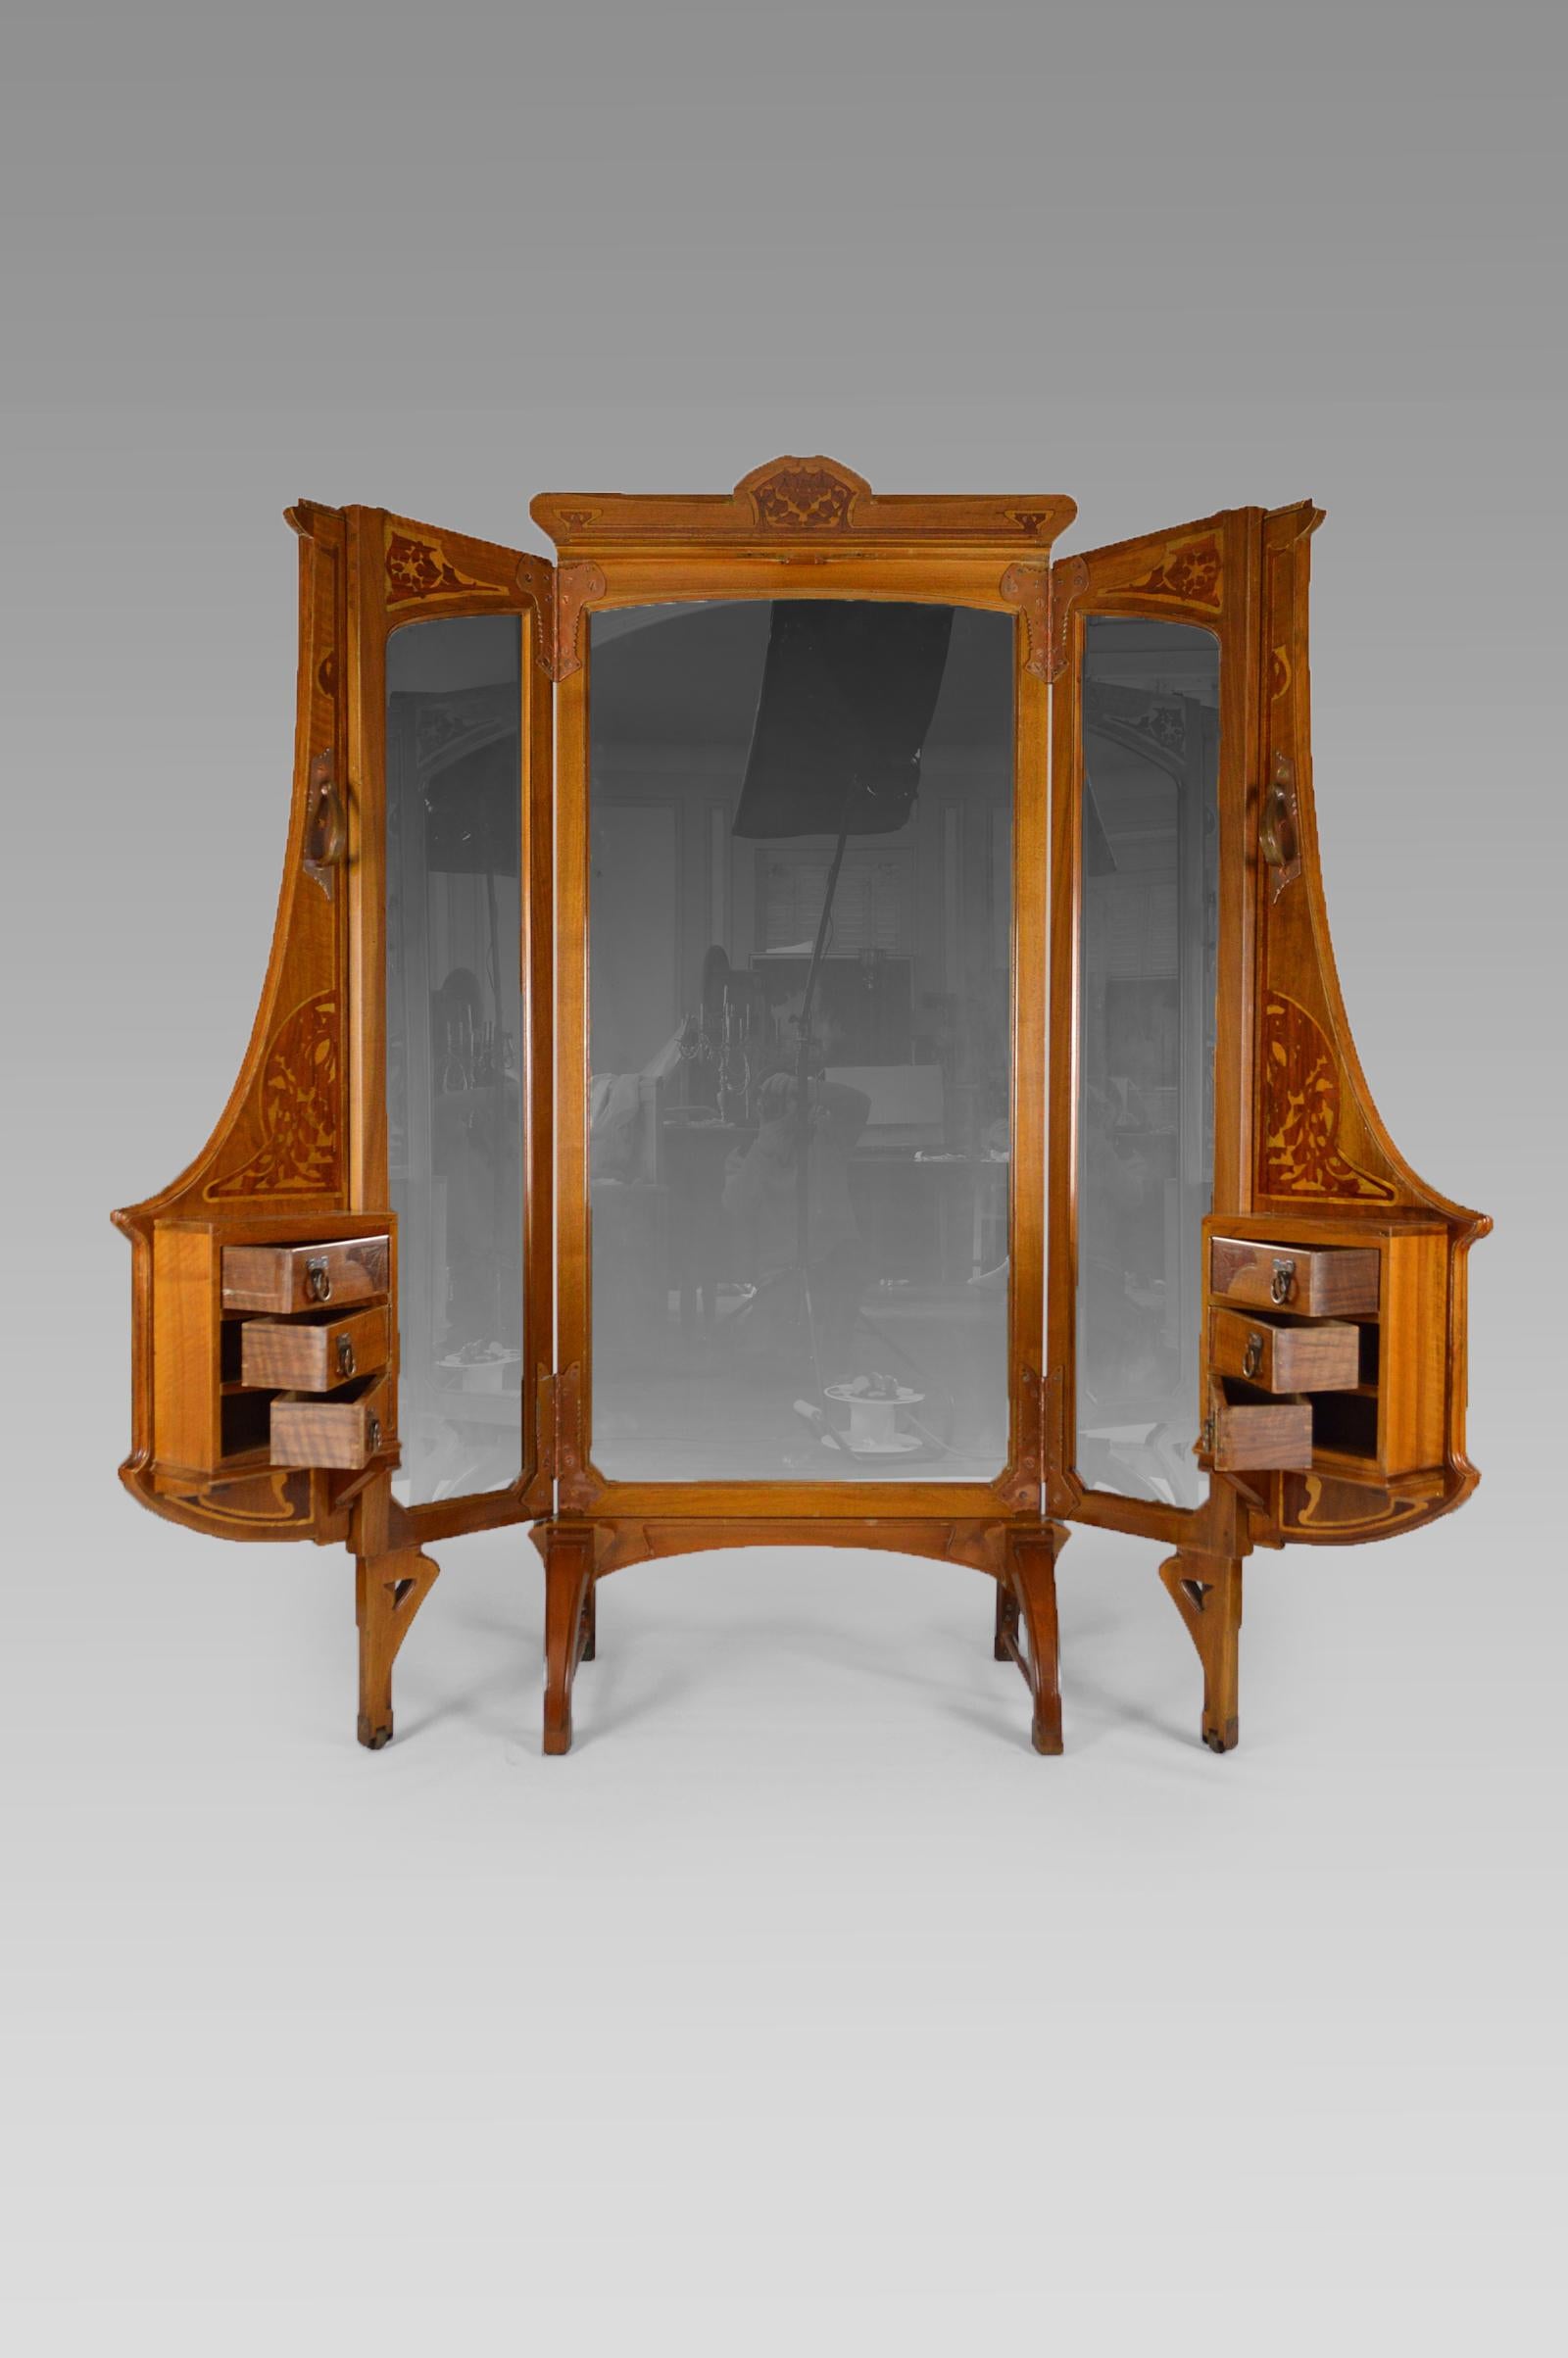 Wonderful polyptych (5 panels) cheval mirror / vanity dressing table.

In mahogany and inlaid from different woods.
Handles, hinges and drawer pulls in copper.

5 panels:
3 with mirrors
2 with drawers

Art Nouveau.
France, 1901 (Date on